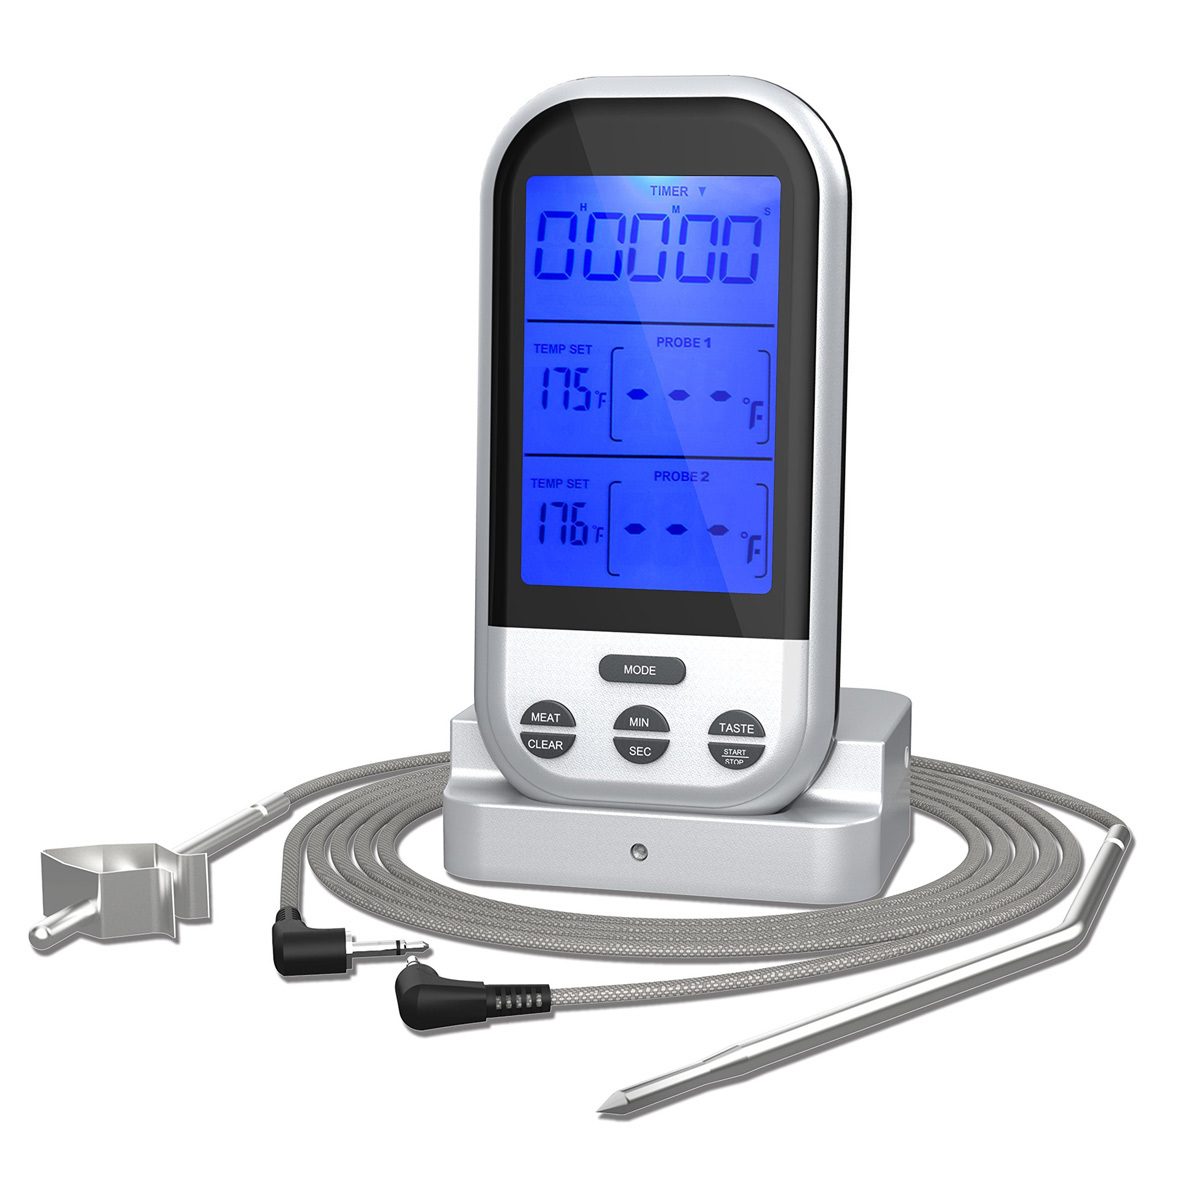 https://www.familyhandyman.com/wp-content/uploads/2018/03/digital-thermometer-with-wireless-remote.jpg?fit=696%2C696